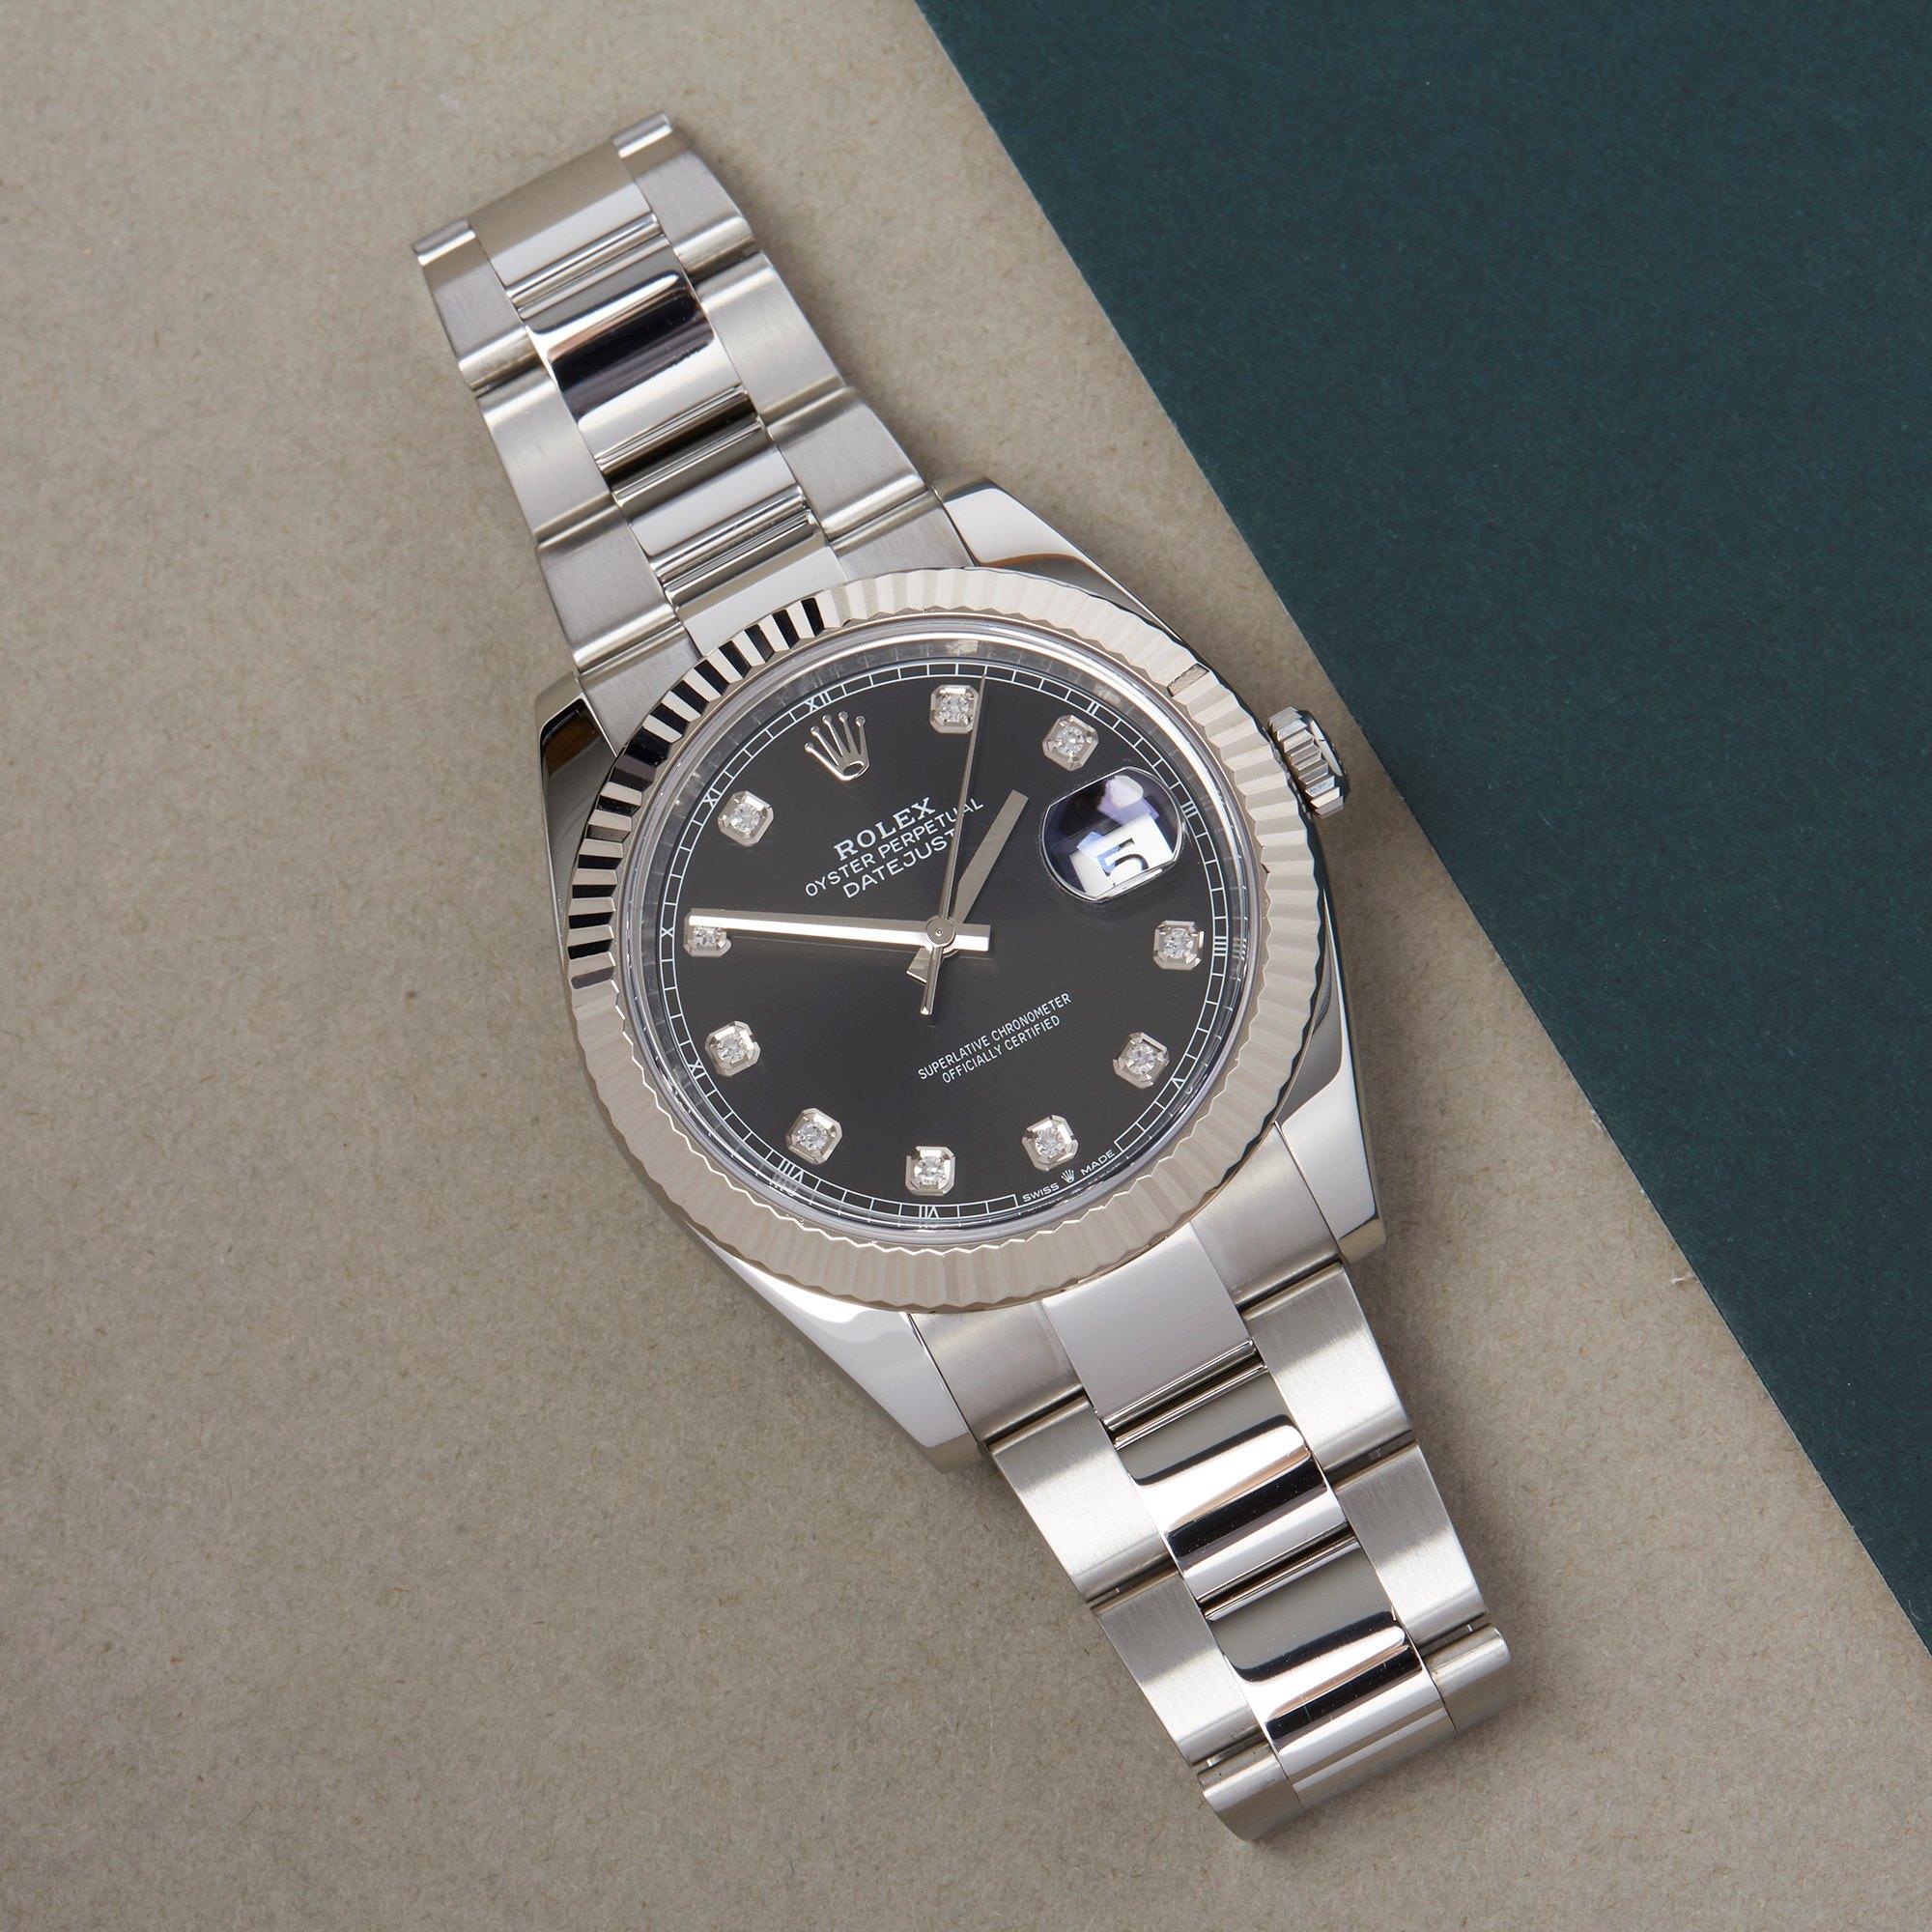 Xupes Reference: W007622
Manufacturer: Rolex
Model: Datejust
Model Variant: 41
Model Number: 126334
Age: 43743
Gender: Men
Complete With: Rolex Box, Manuals, Guarantee, Card Holder & Swing Tag
Dial: Black With Diamond Markers
Glass: Sapphire